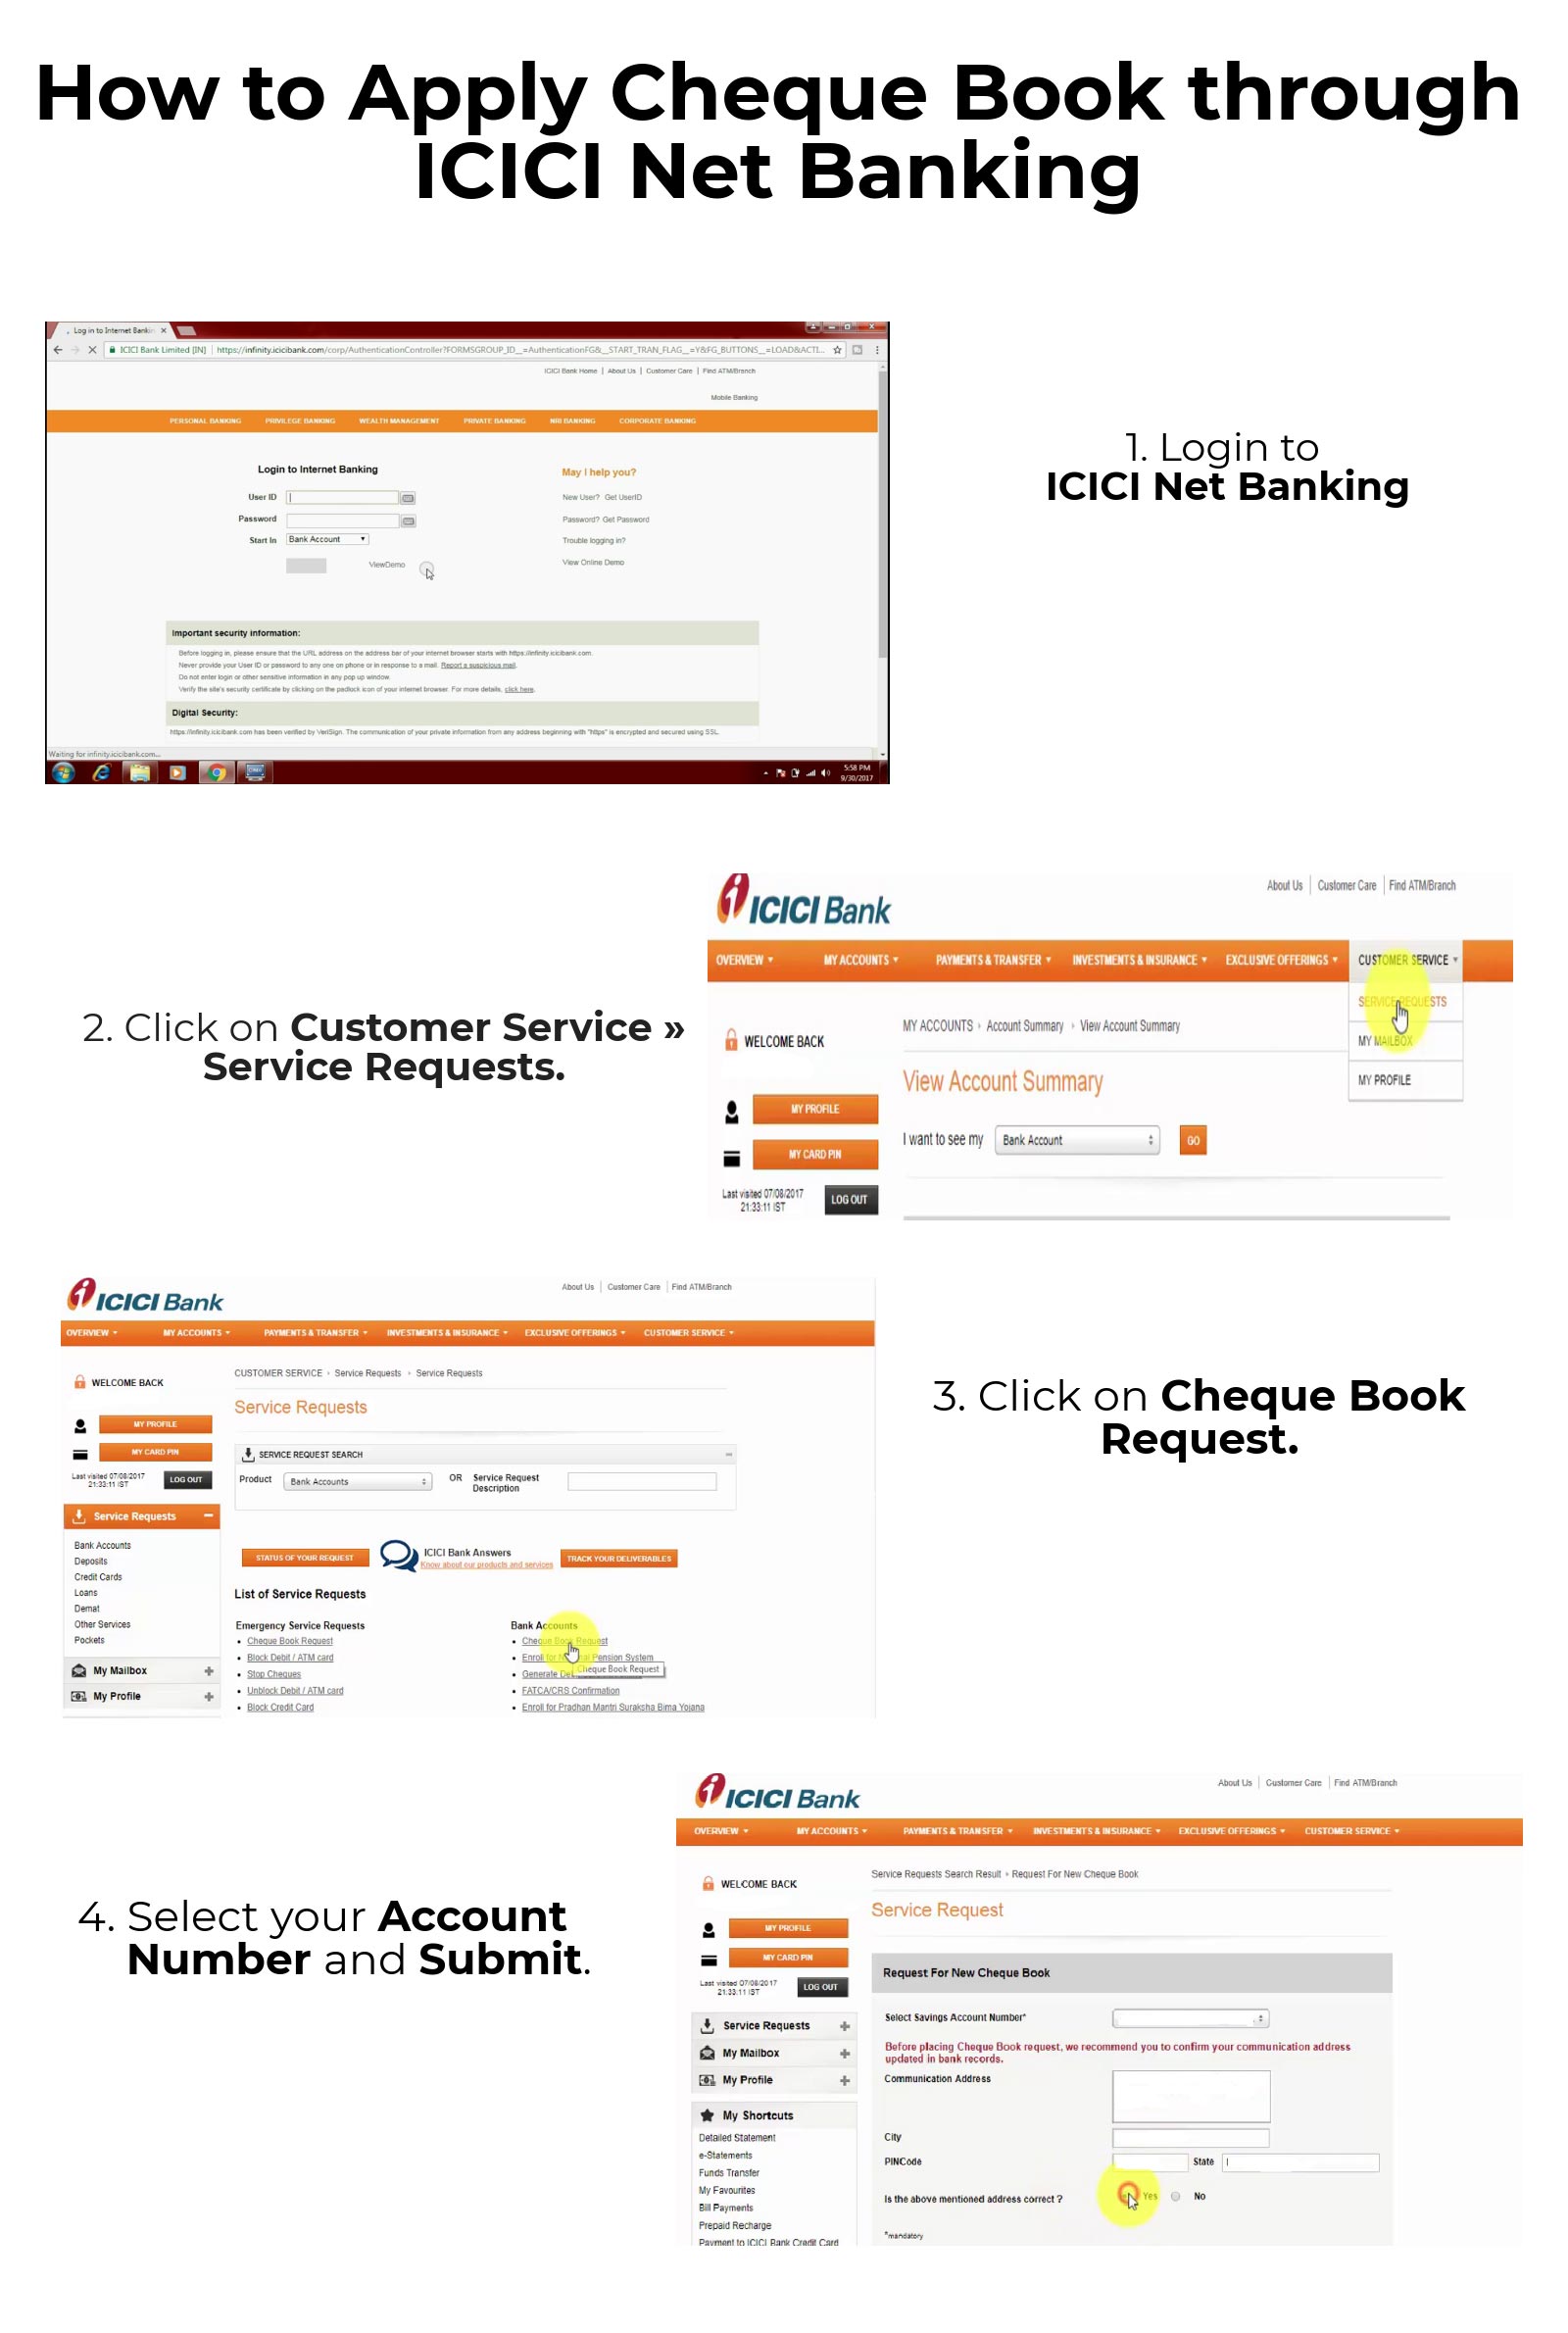 
                    1.   Login to ICICI Net Banking
                    2.  Click on Customer Service � Service Requests.
                    3.  Click on Cheque Book Request.
                    4.  Select your Account Number and Submit.
                    